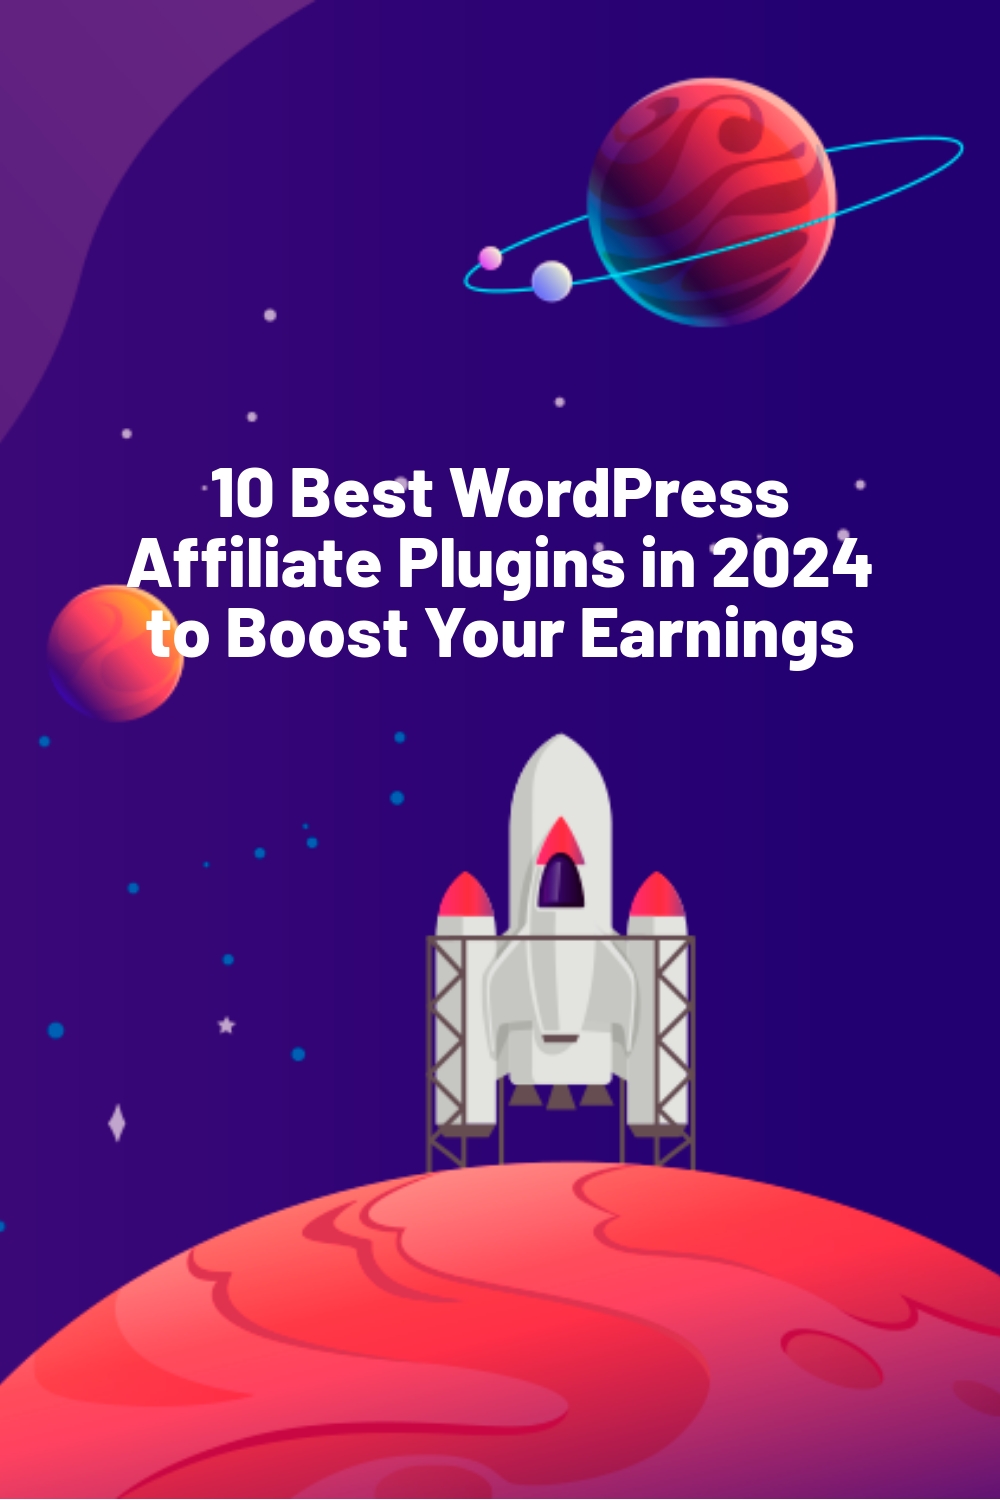 10 Best WordPress Affiliate Plugins in 2024 to Boost Your Earnings